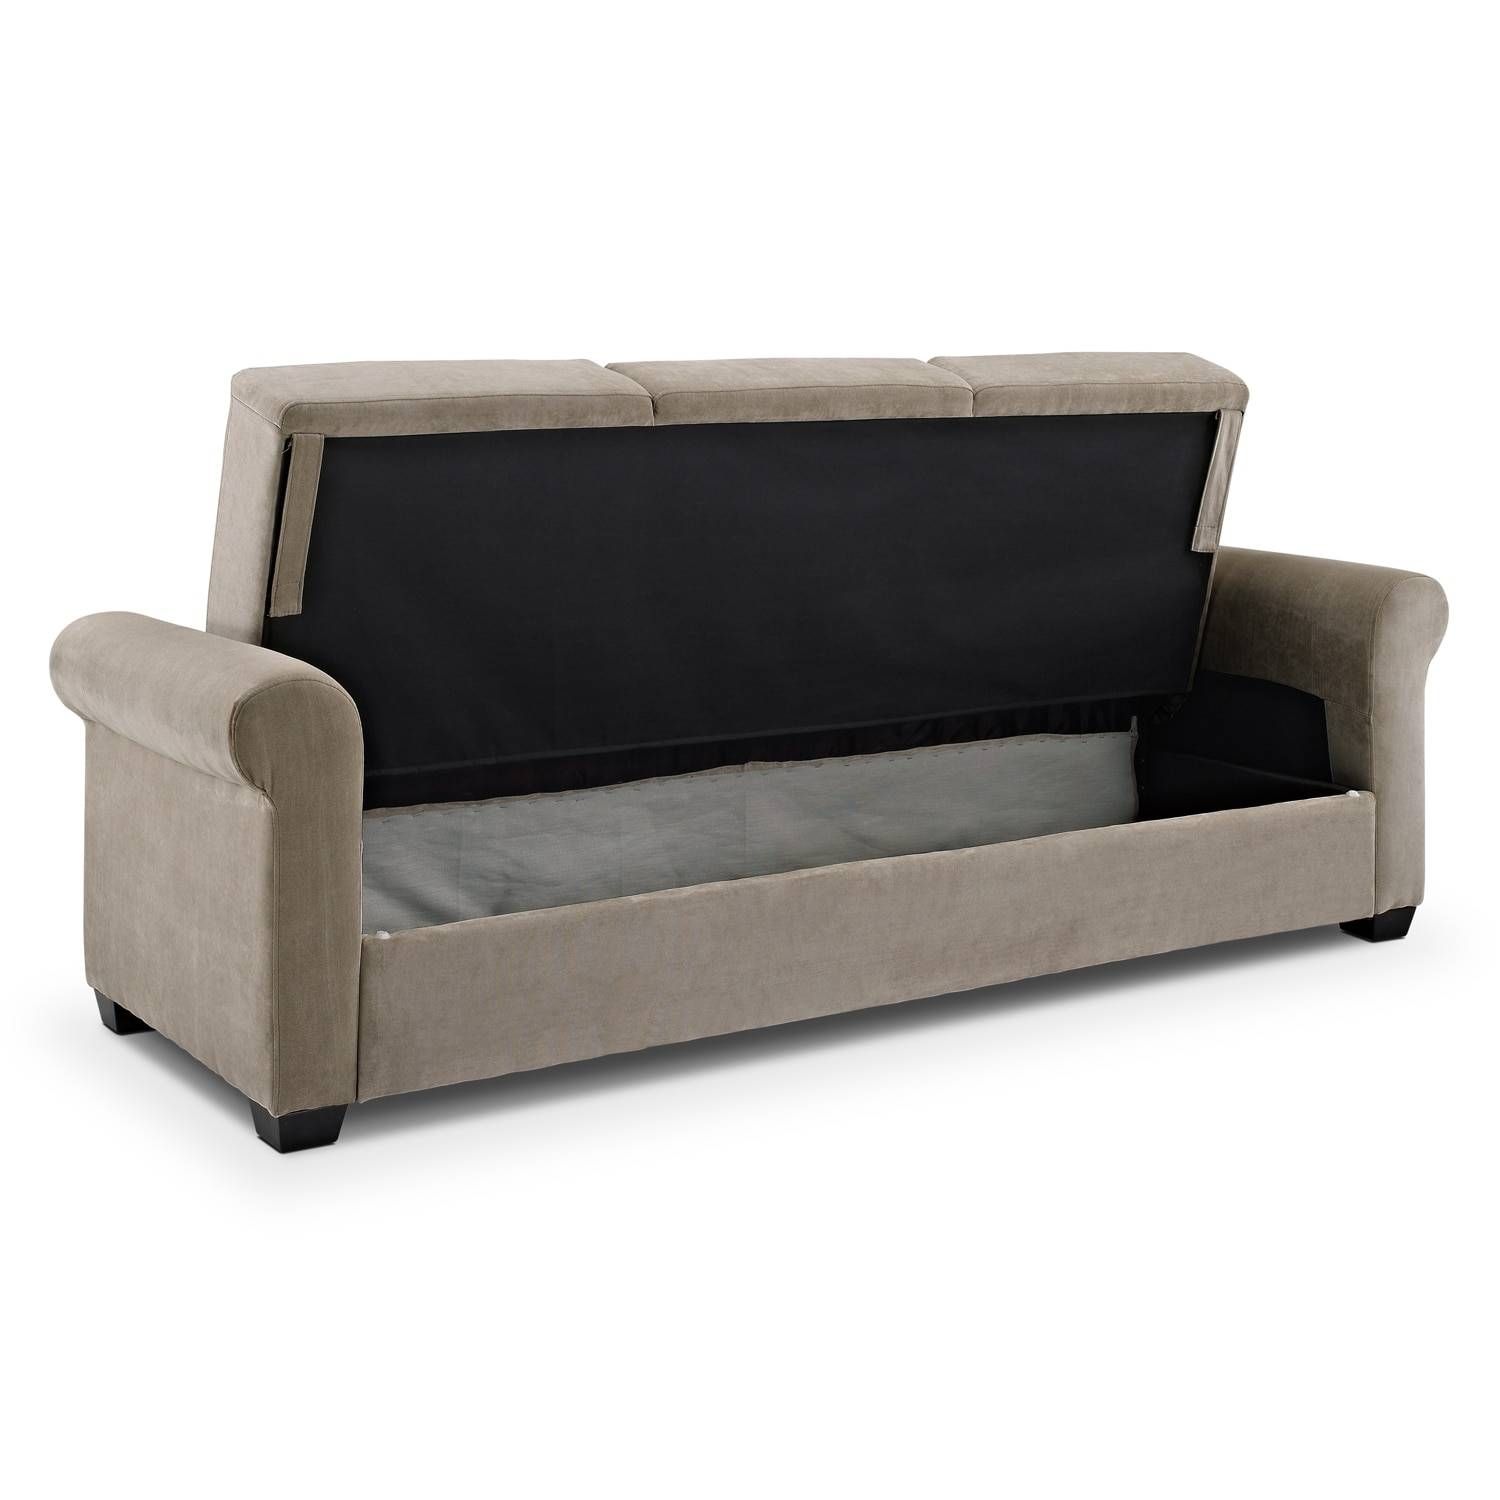 Thomas Futon Sofa Bed With Storage – Light Brown | Value City Intended For Sofa Beds With Storages (View 6 of 30)